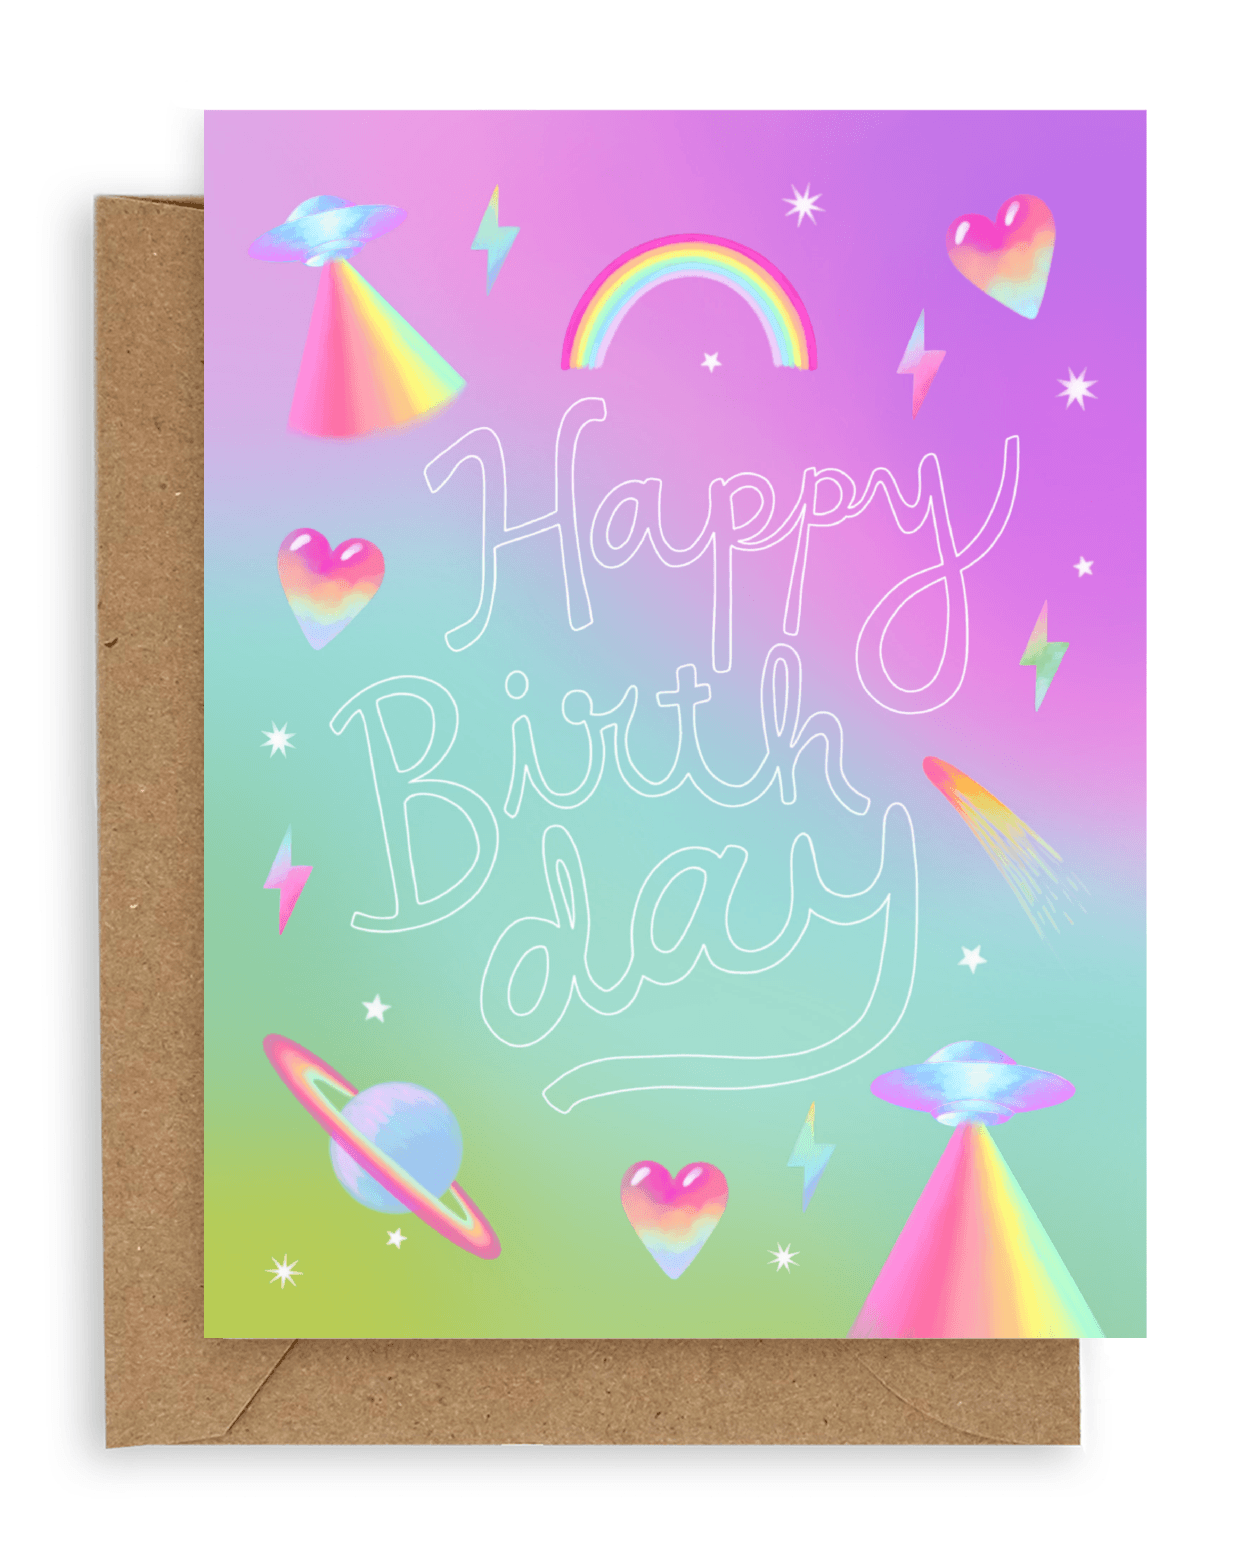 Greeting card with &quot;happy birthday&quot; across the front in white hollow font with neon icons printed on a gradient pink and blue background. Shown with kraft envelope.